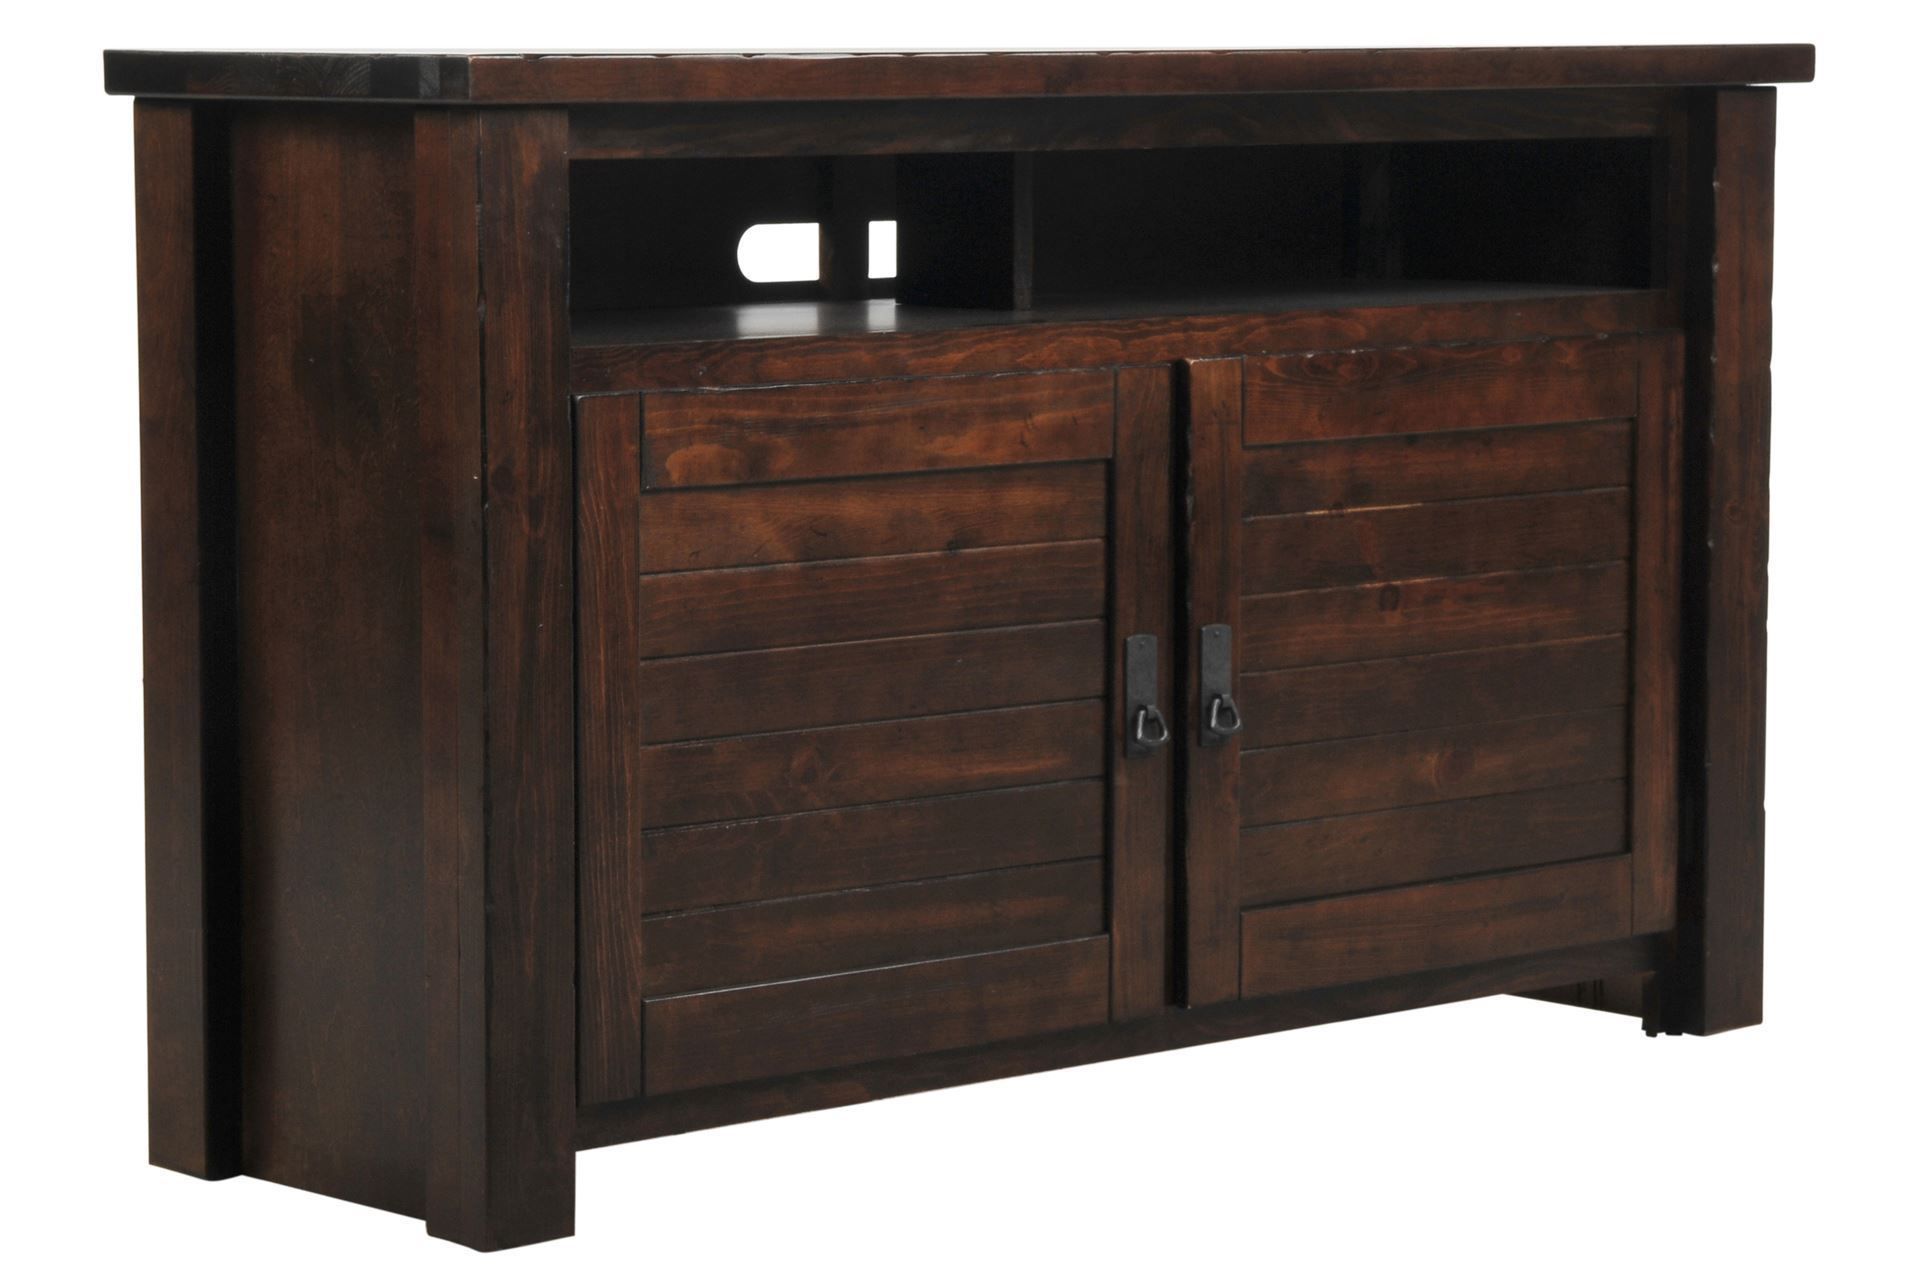 Canyon 54 Inch Tv Stand | Media | Living Spaces Furniture, Living Throughout Canyon 54 Inch Tv Stands (Photo 3 of 30)